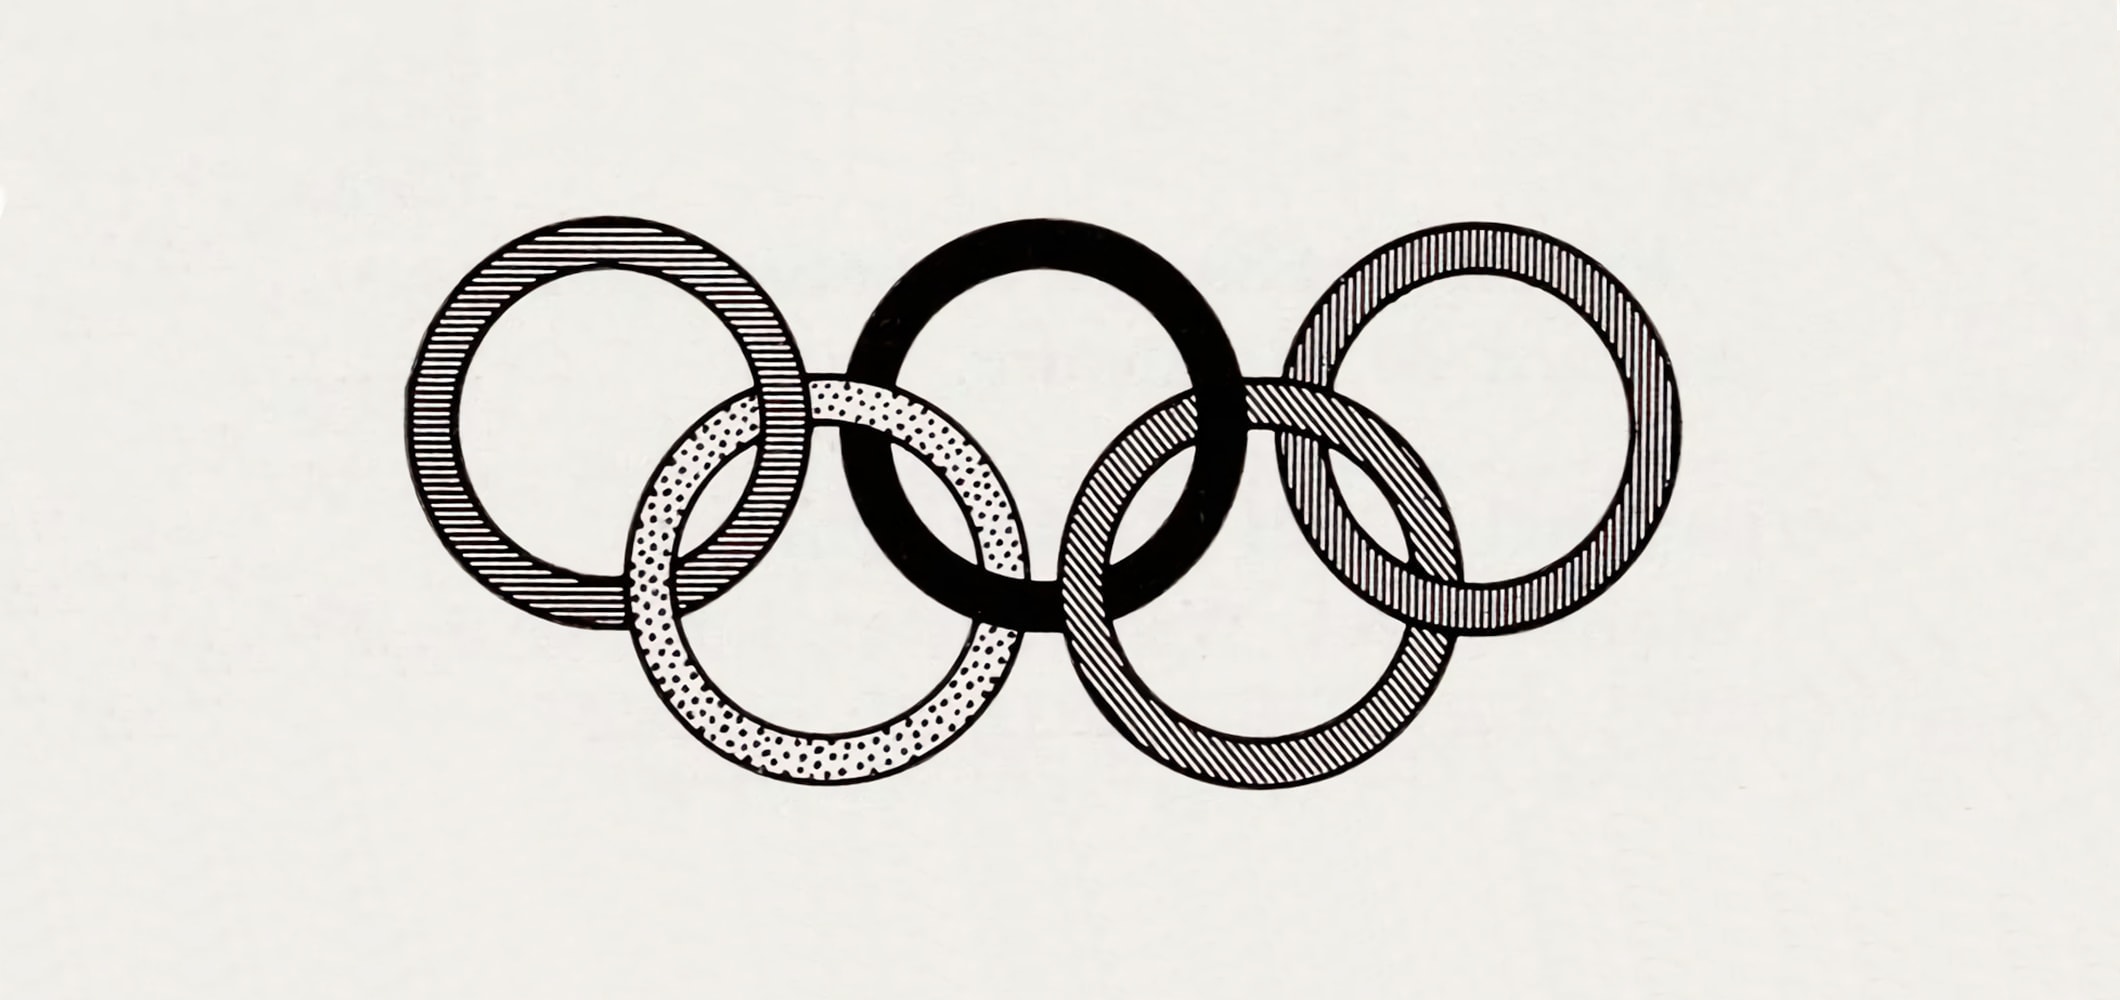 Is the olympic flag kinda racist? Black ring for Africa? - Quora